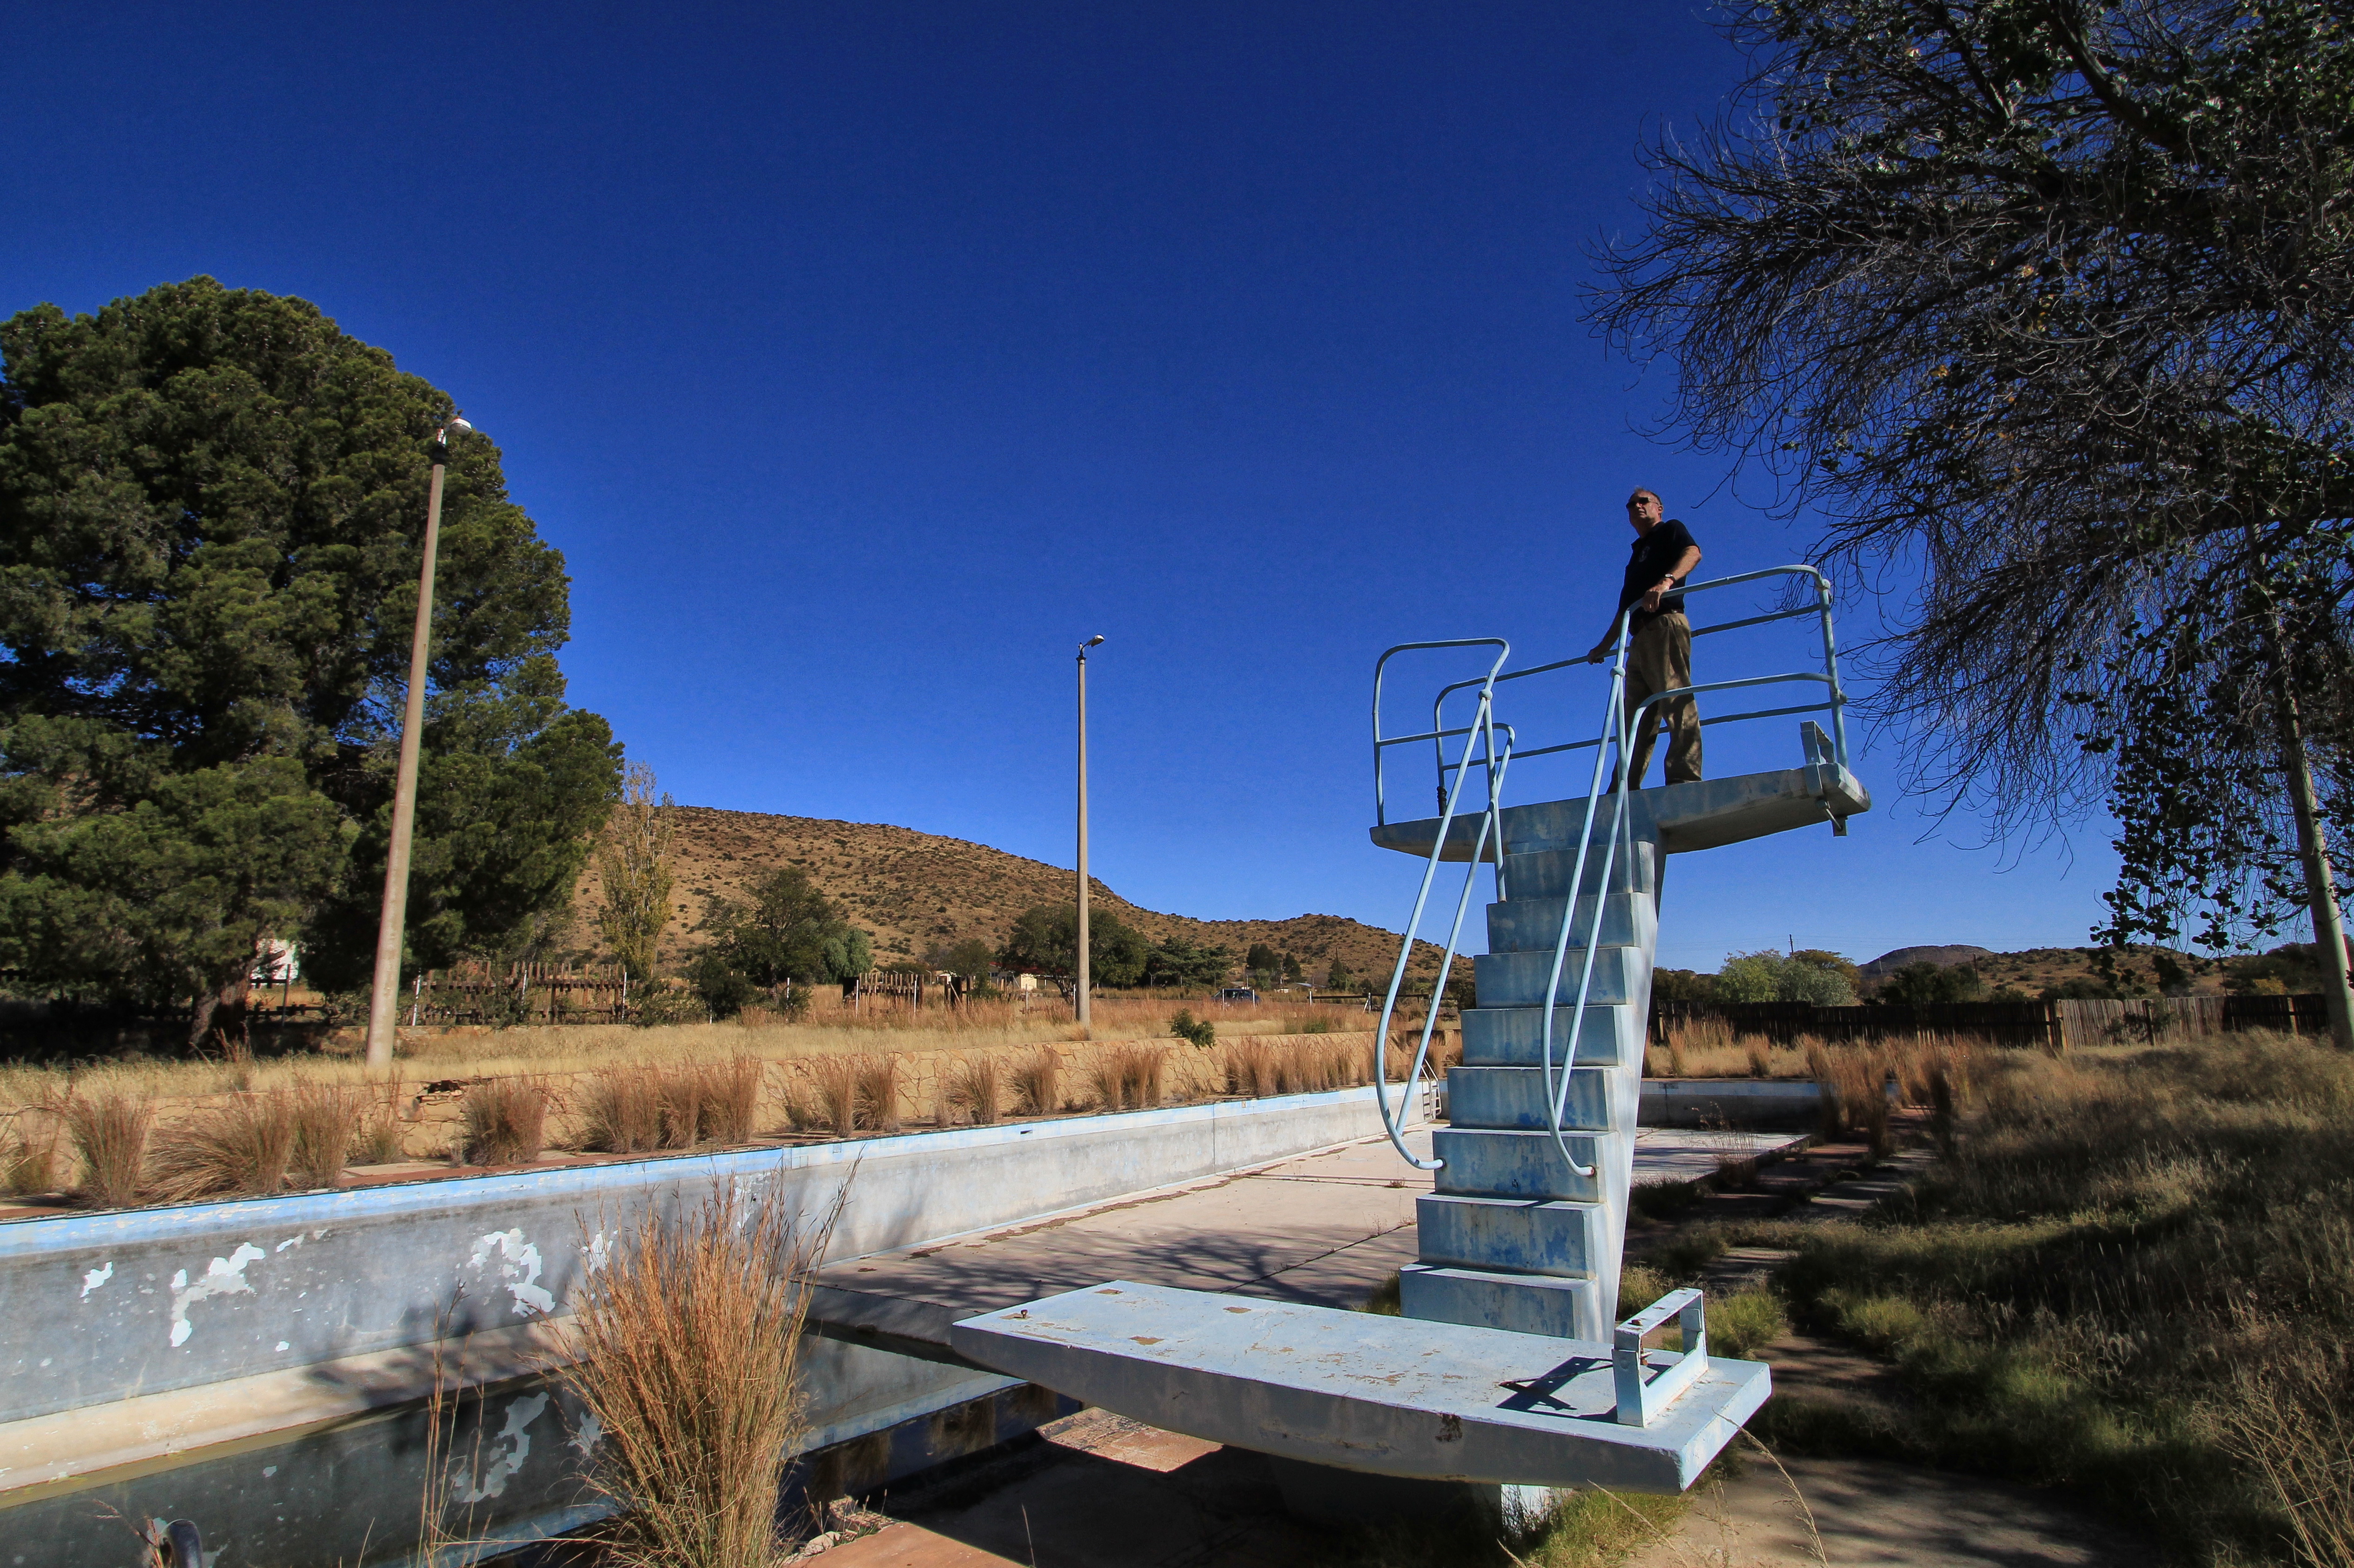 Stephen Mullineux, now retired from the Department of Water Affairs, stands on the old diving board at abandoned Teebus. Image: Chris Marais